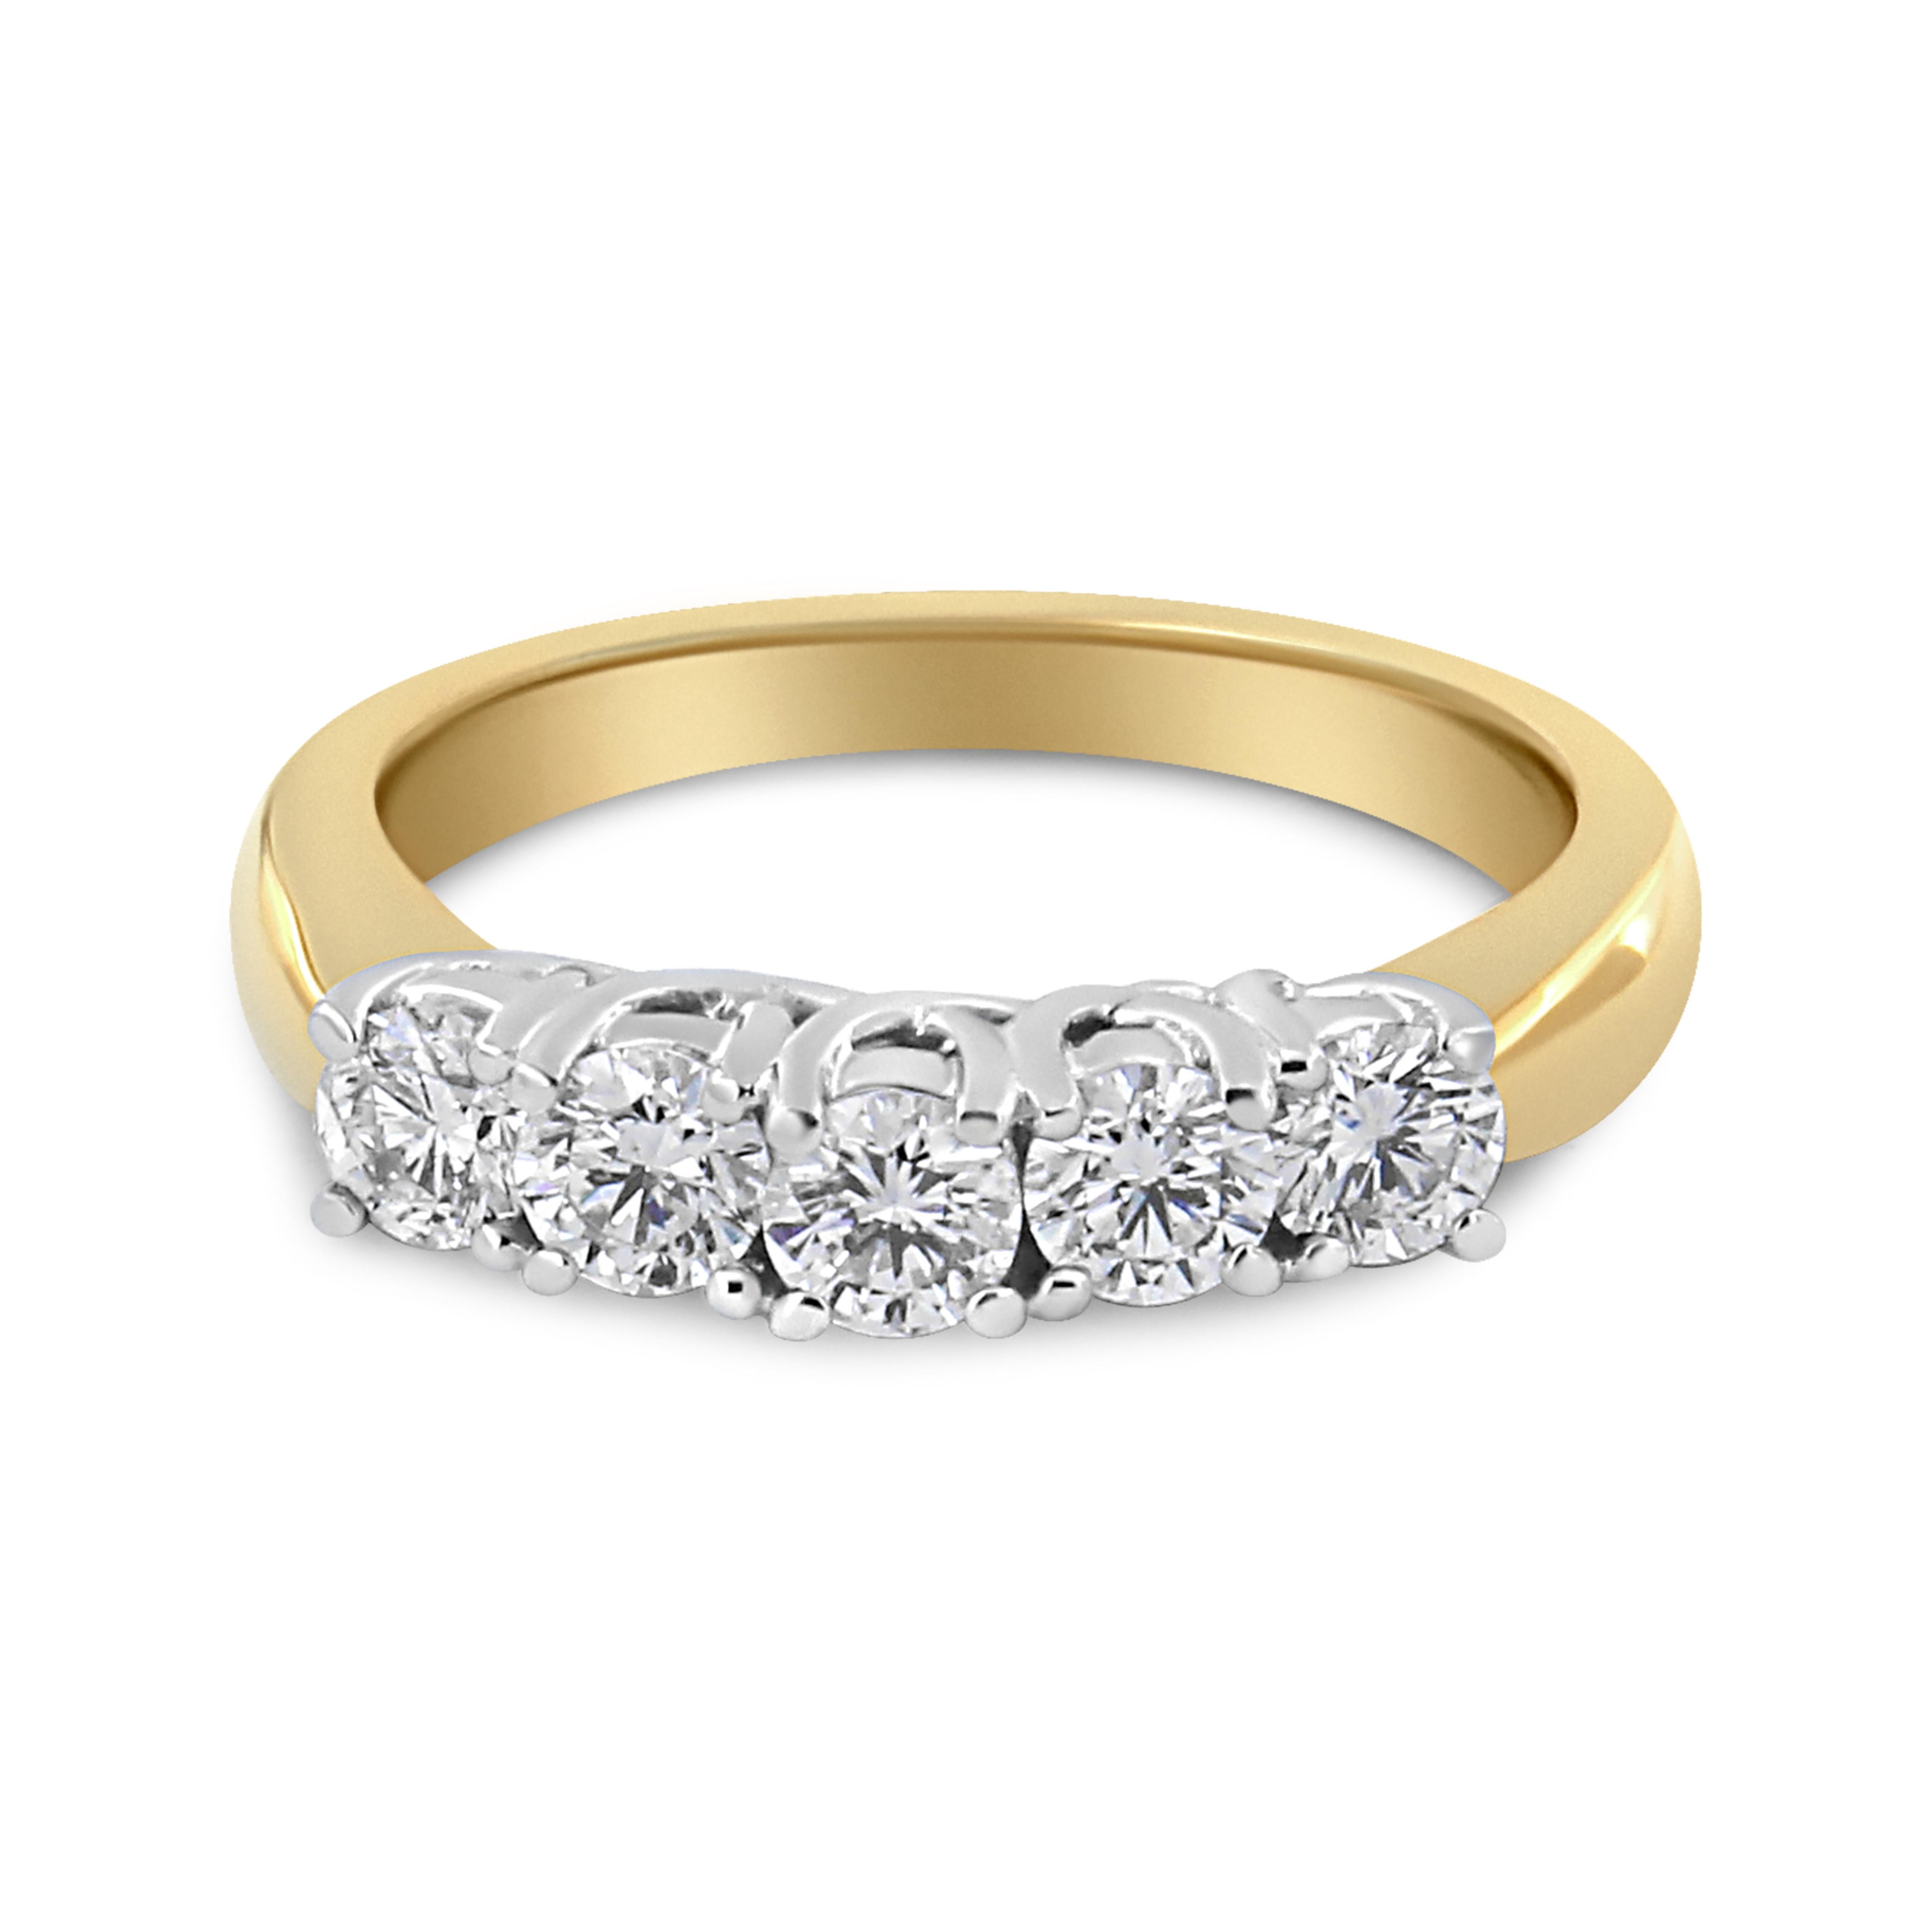 For Sale:  18K Yellow Gold 1.0 Carat 4 Prong Round Cut Diamond Step Up 5 Stone Ring Band 2